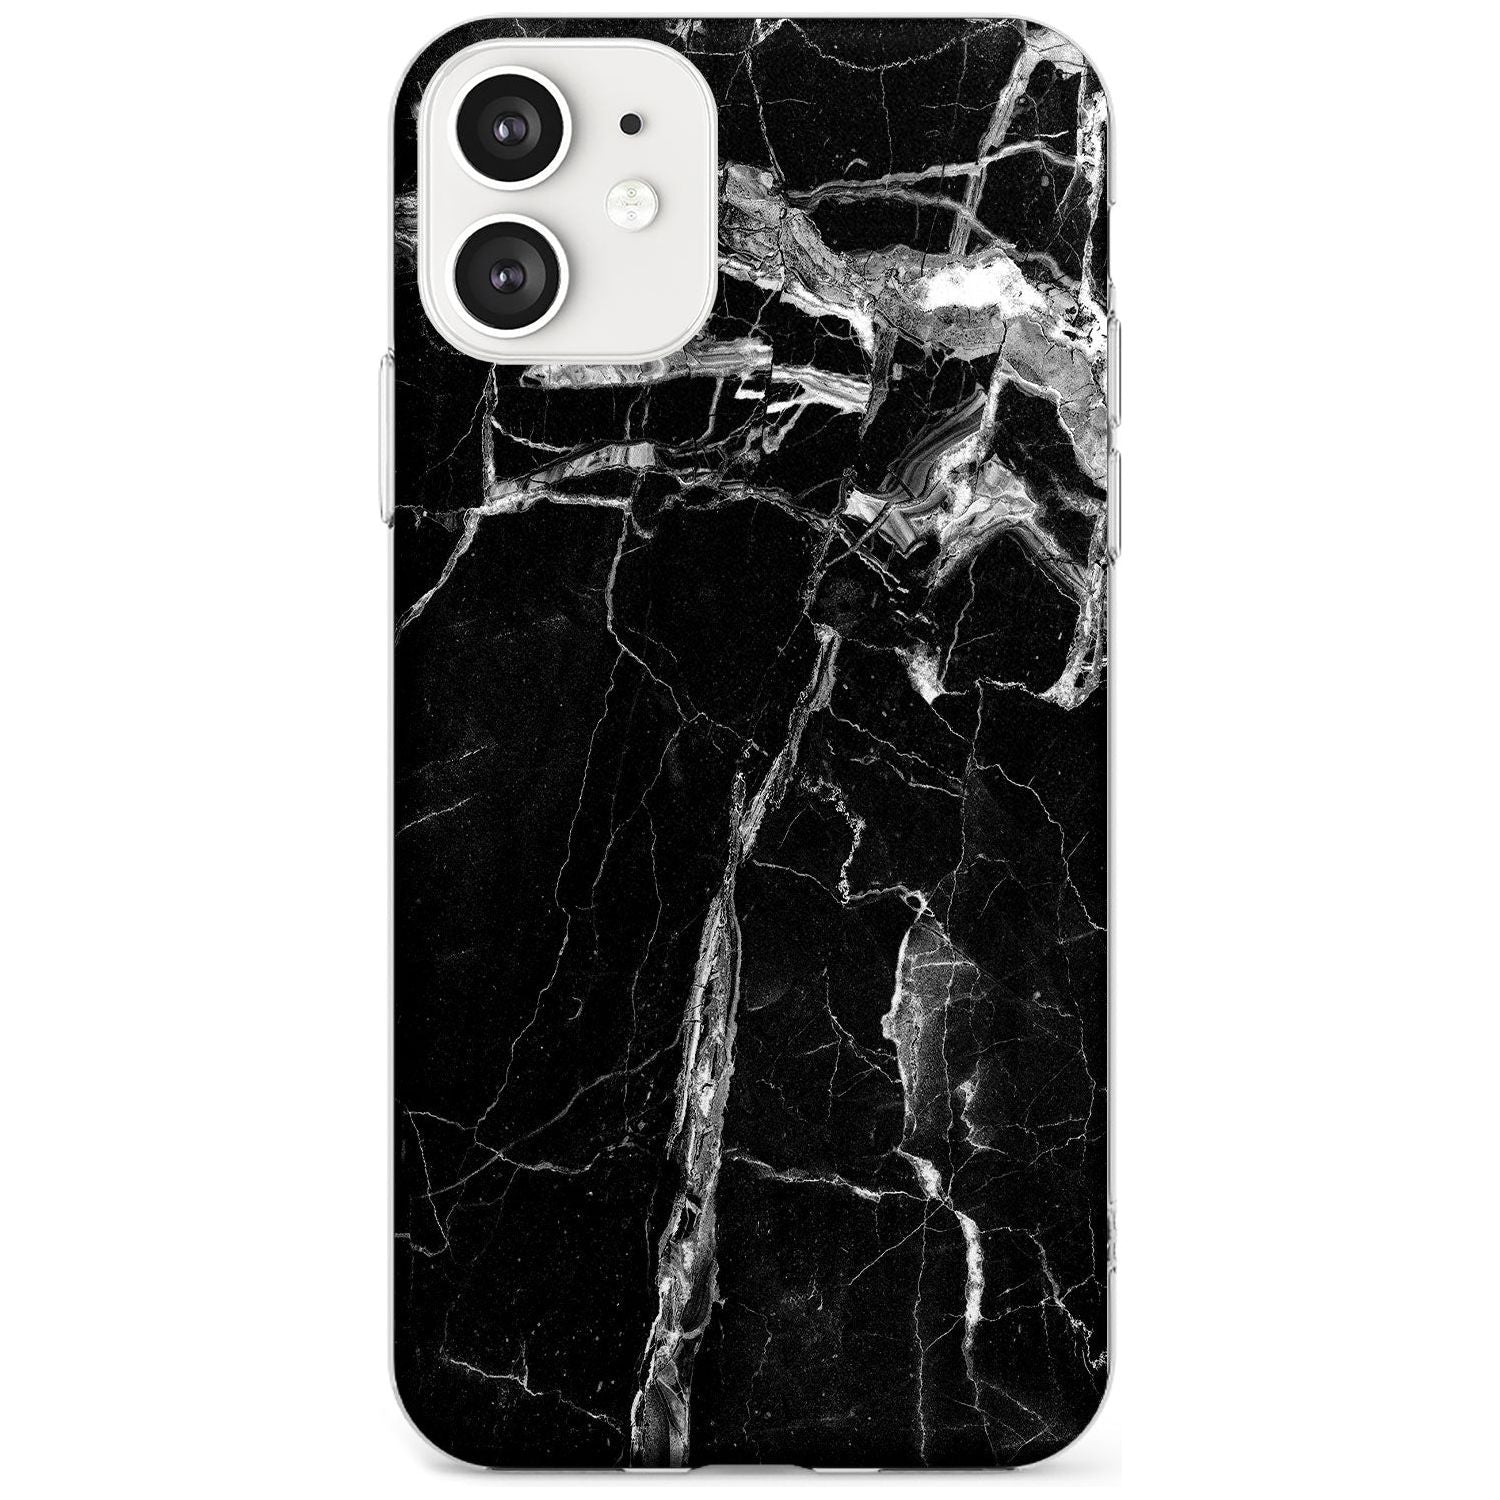 Black Onyx Marble Texture Black Impact Phone Case for iPhone 11